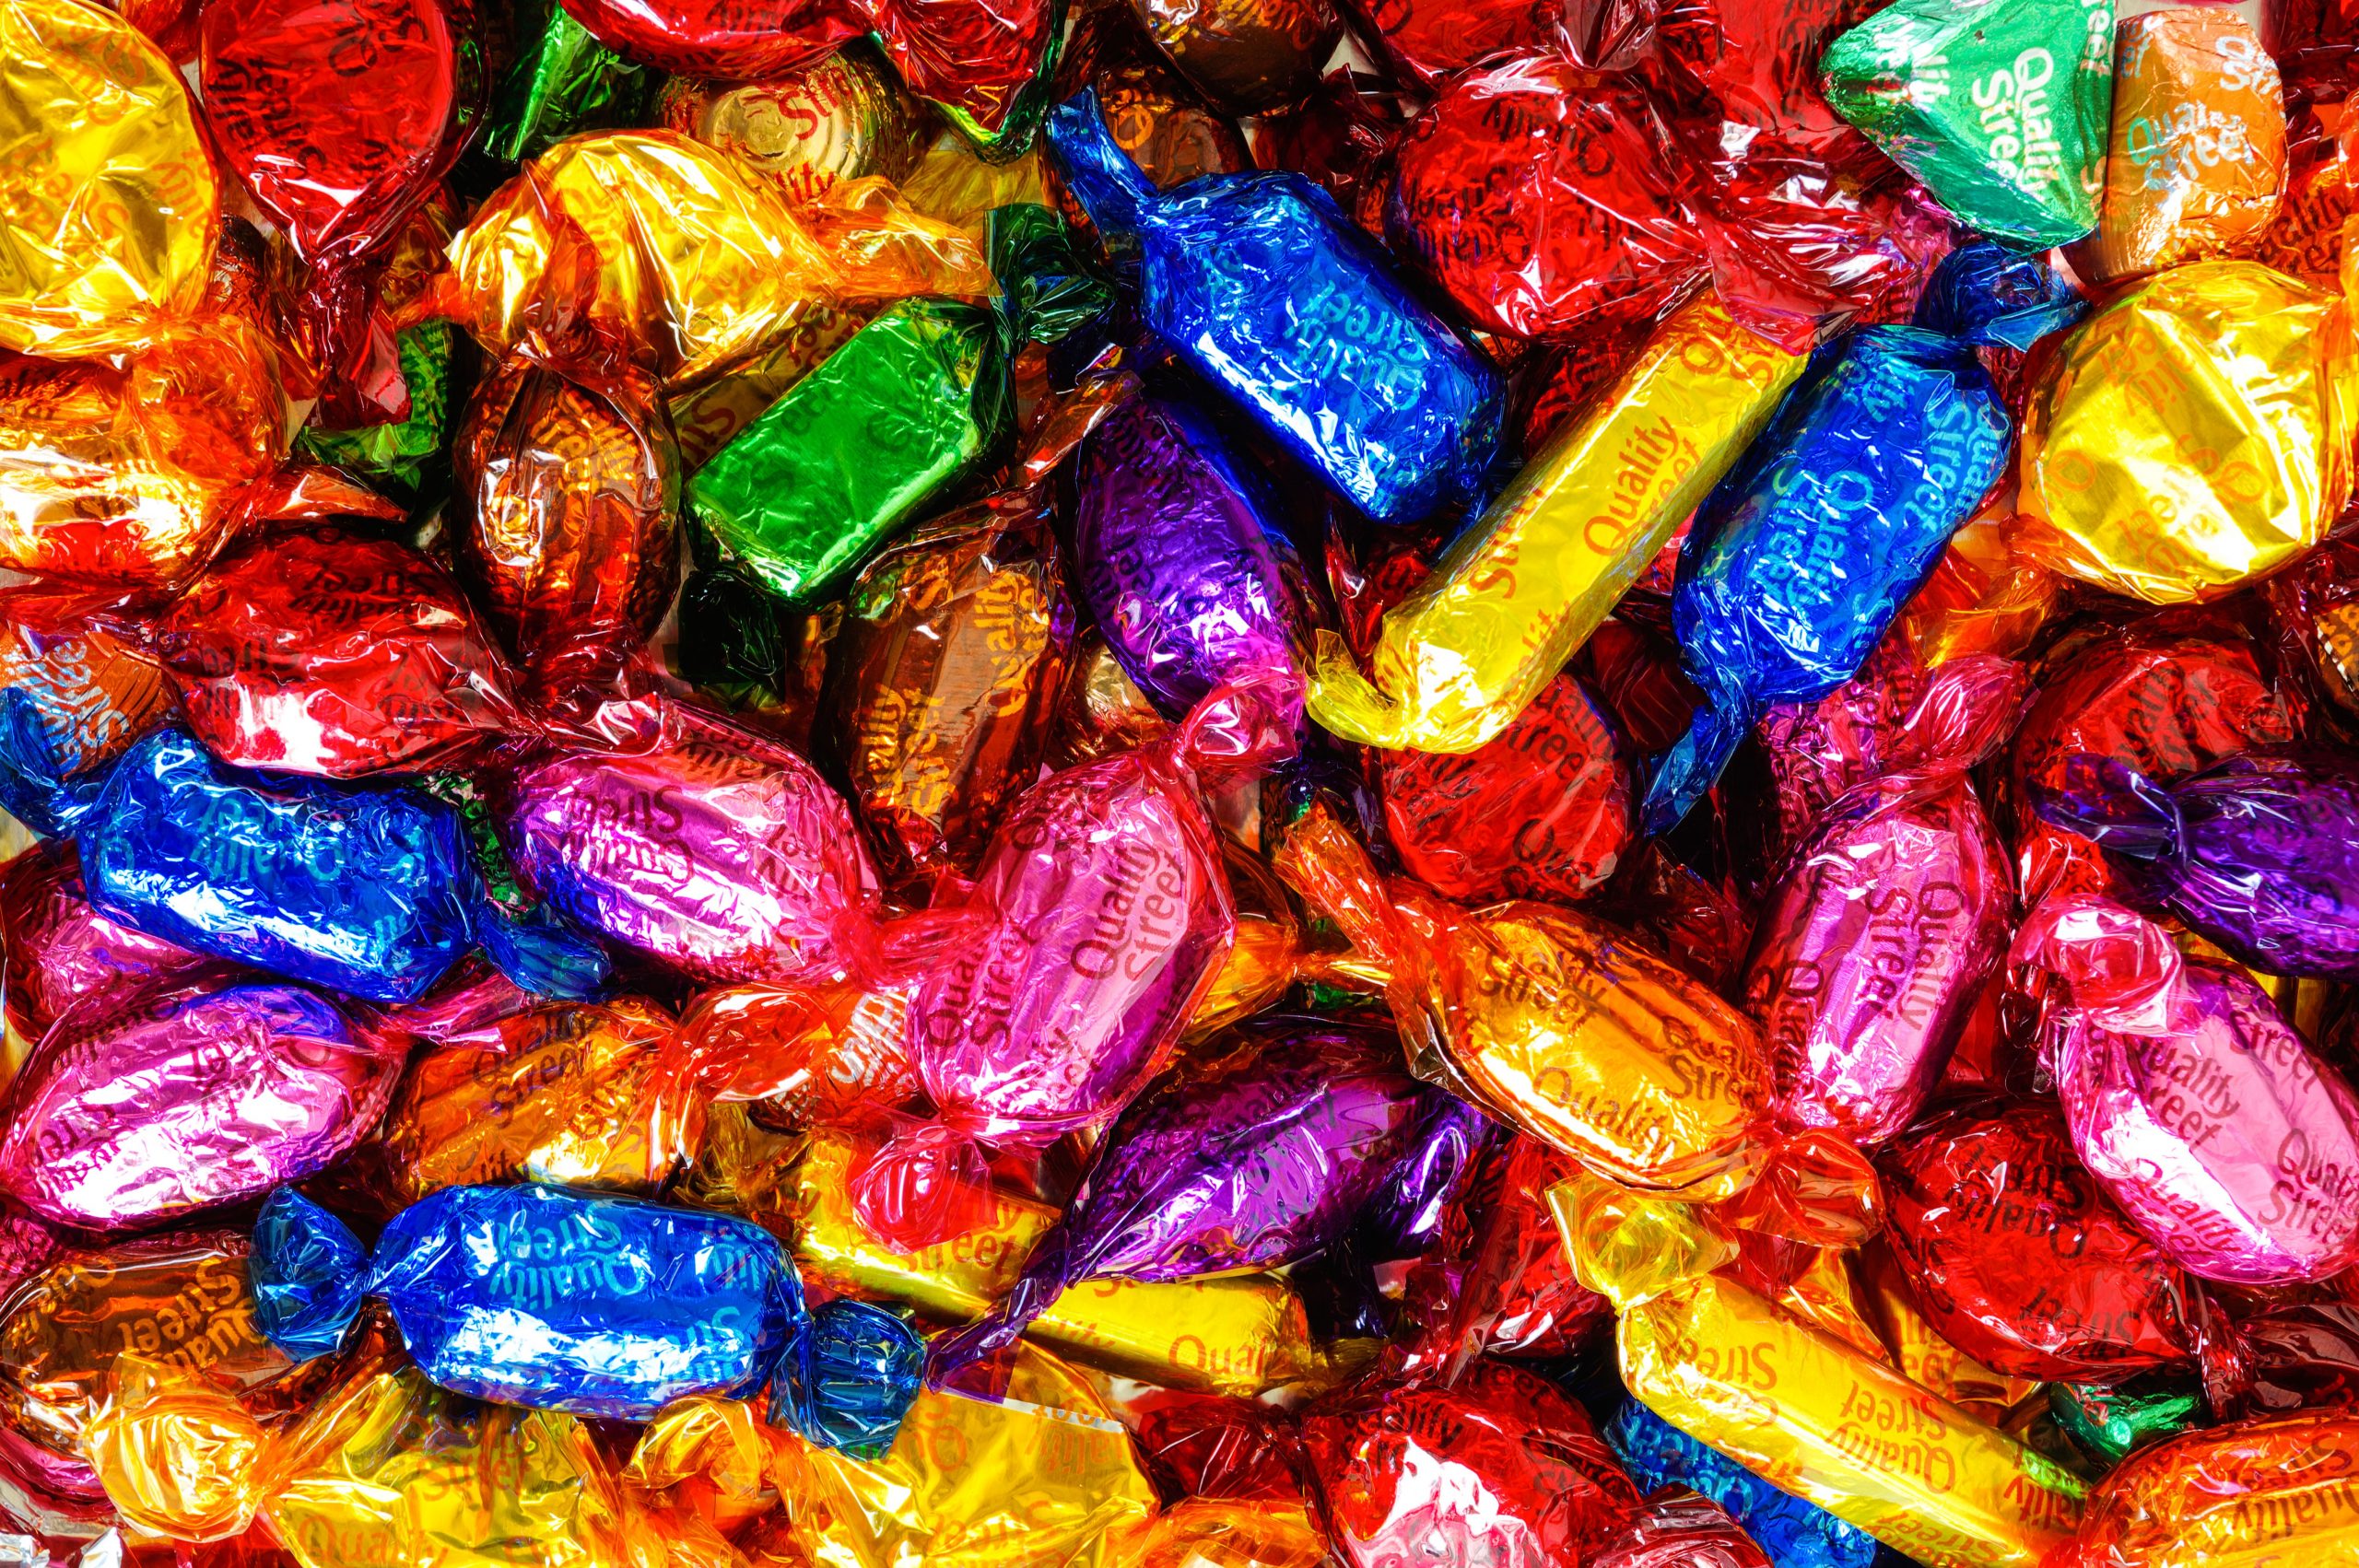 24 Quality Street treats you’ll never see in stores again and shoppers are begging for their return